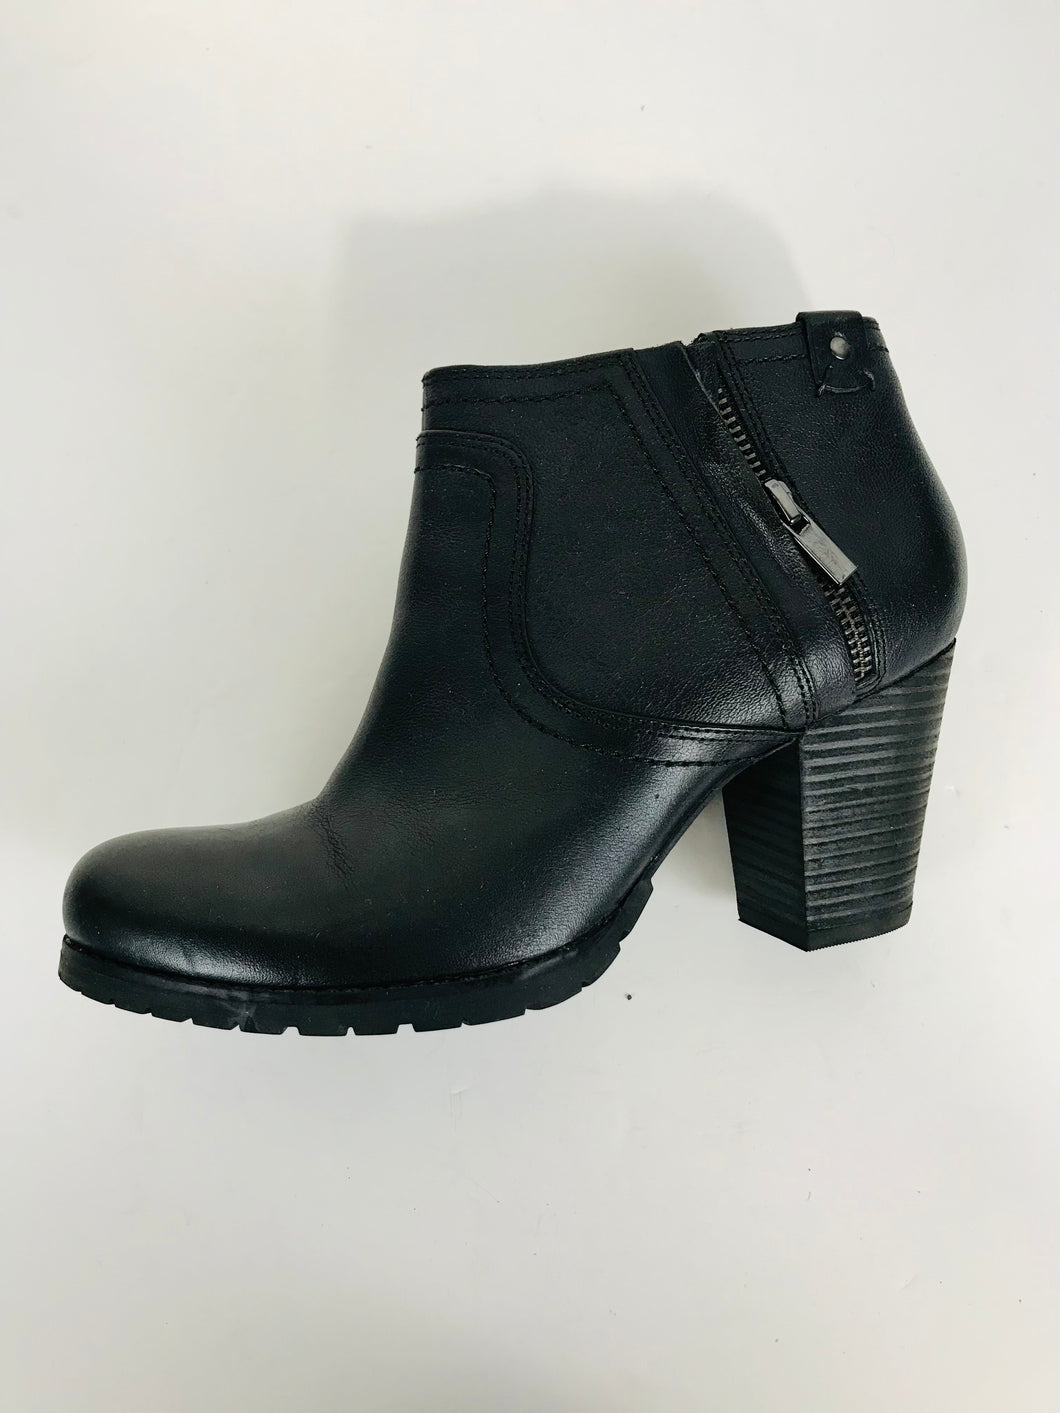 Clarks Women's Leather Ankle Boots | UK5 | Black